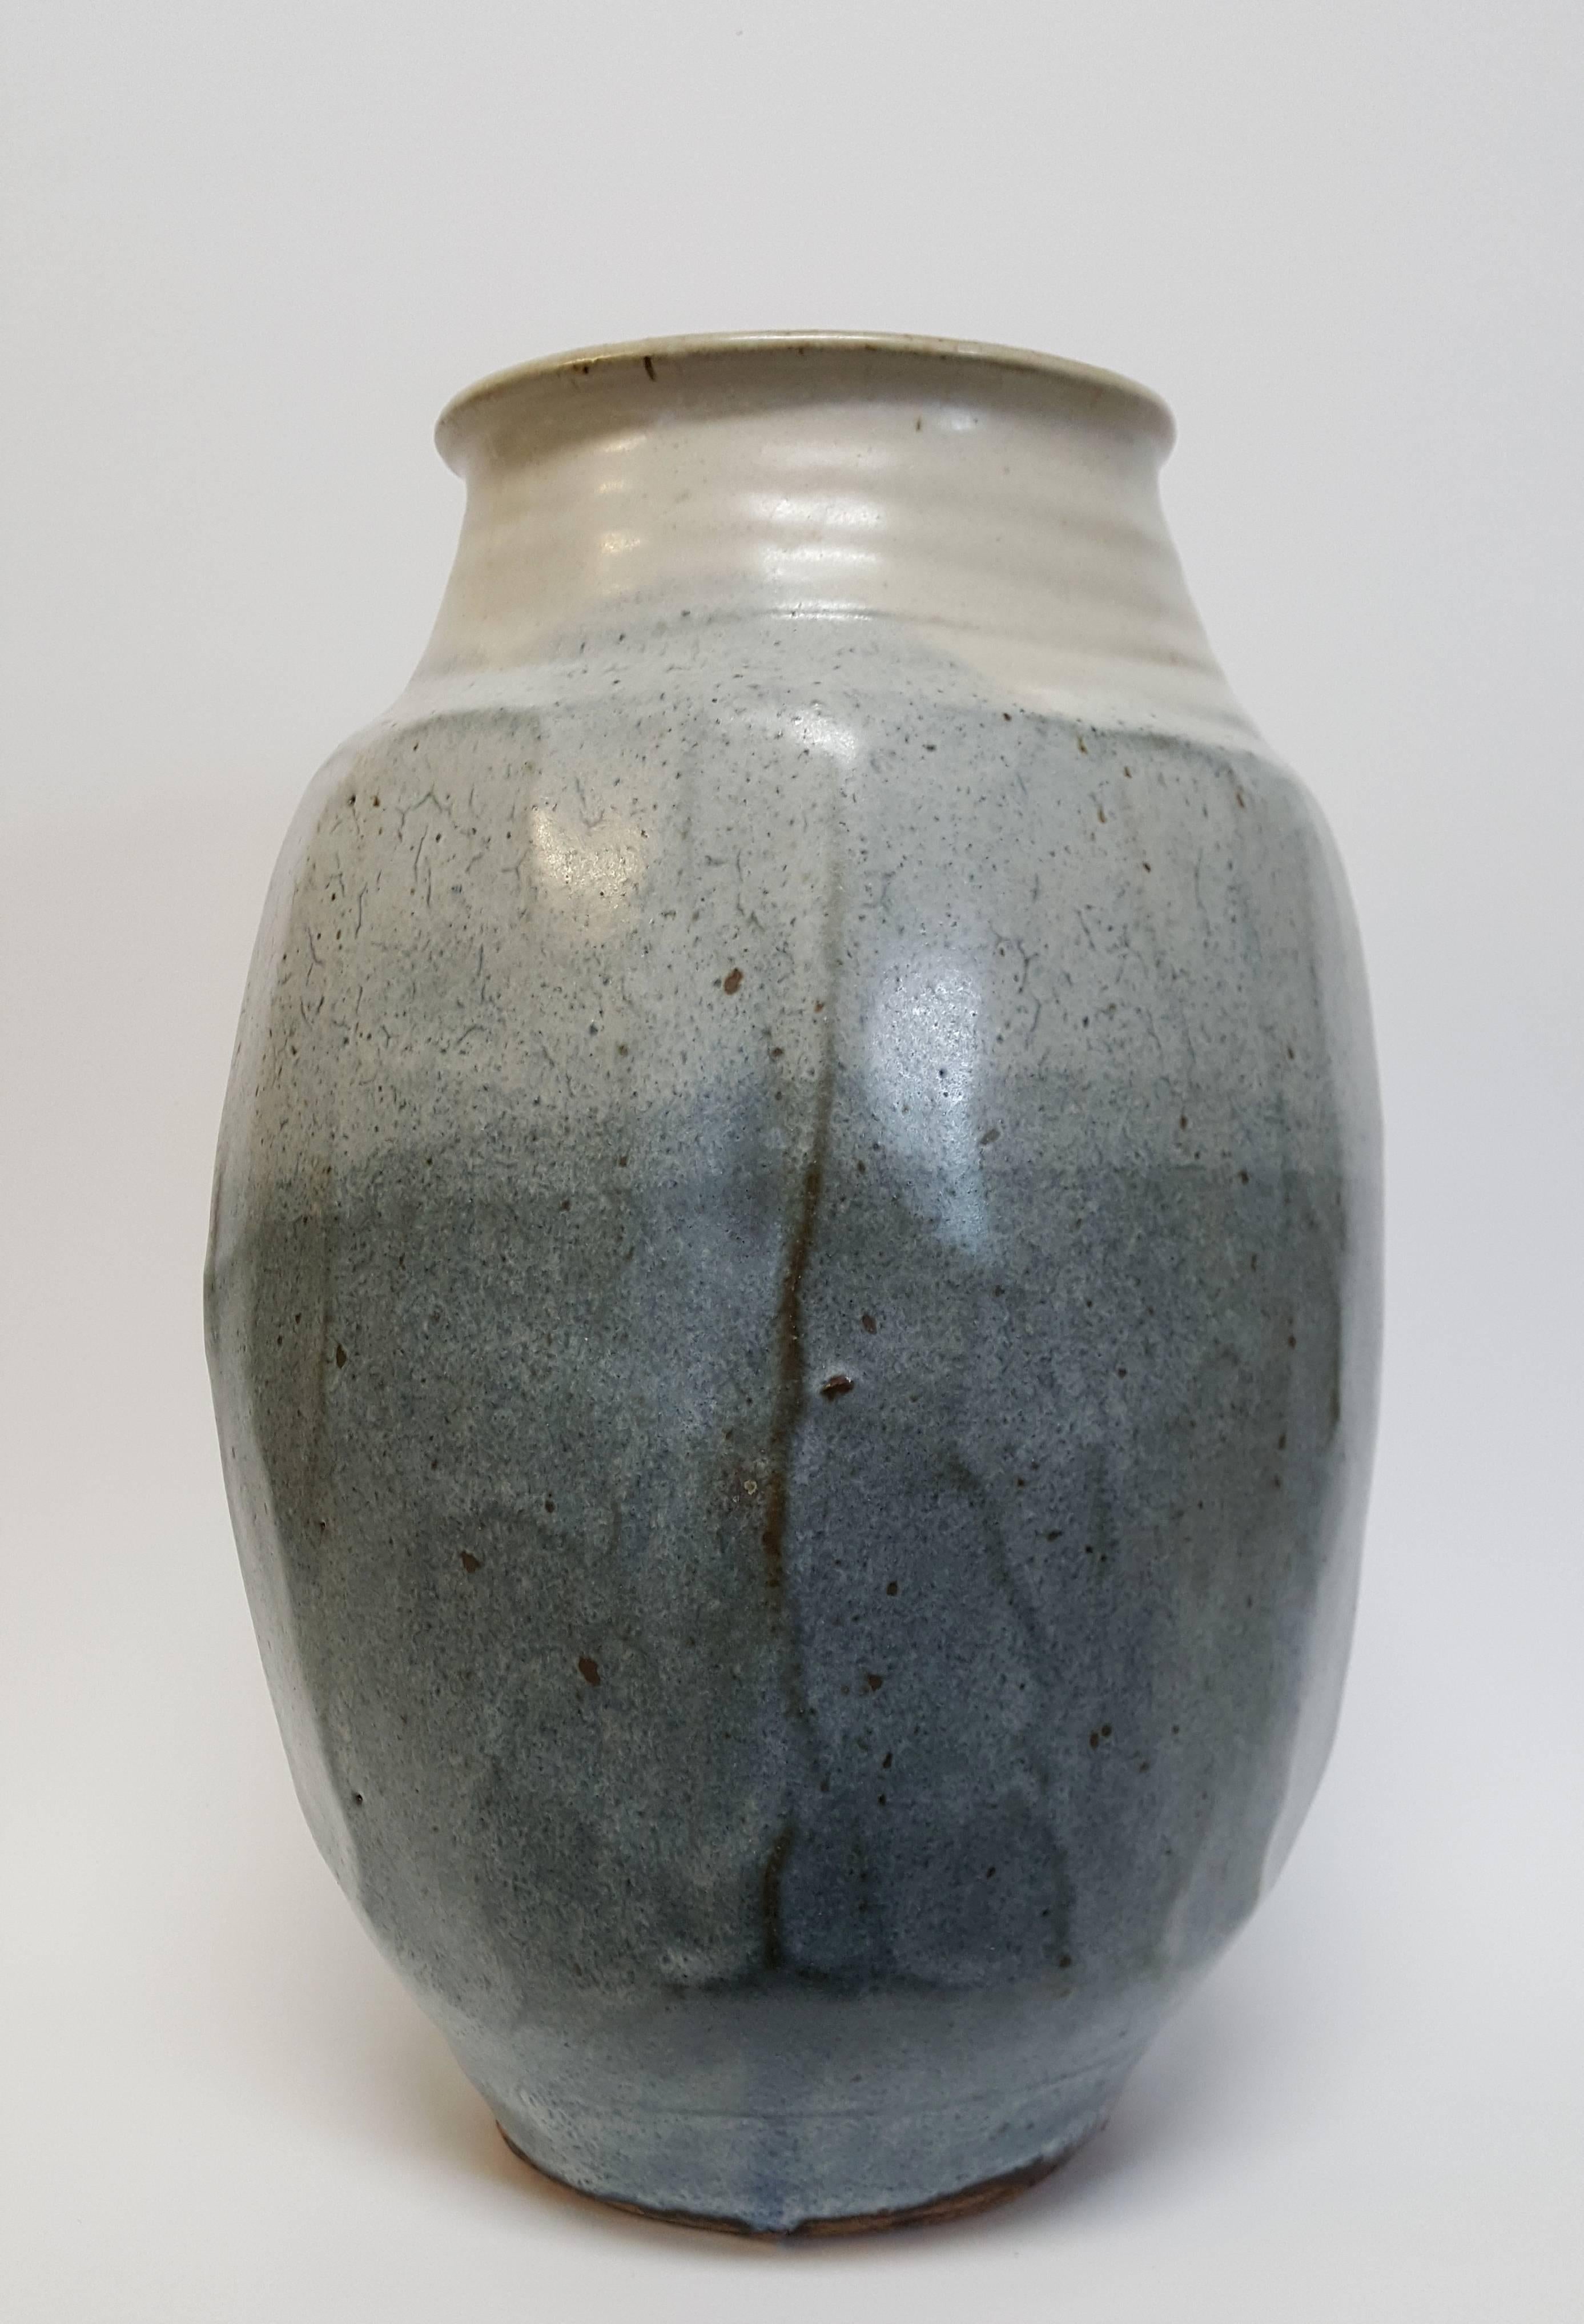 Warren Mackenzie (born 1924)
Large Four Sided Blue Vase, n.d.
Stoneware
Measures: 11 ½ x 7 x 7 inches
Artist’s stamp at base: M.


Mackenzie's defining moment leading to his life's work began while he was a student at the Art Institute of